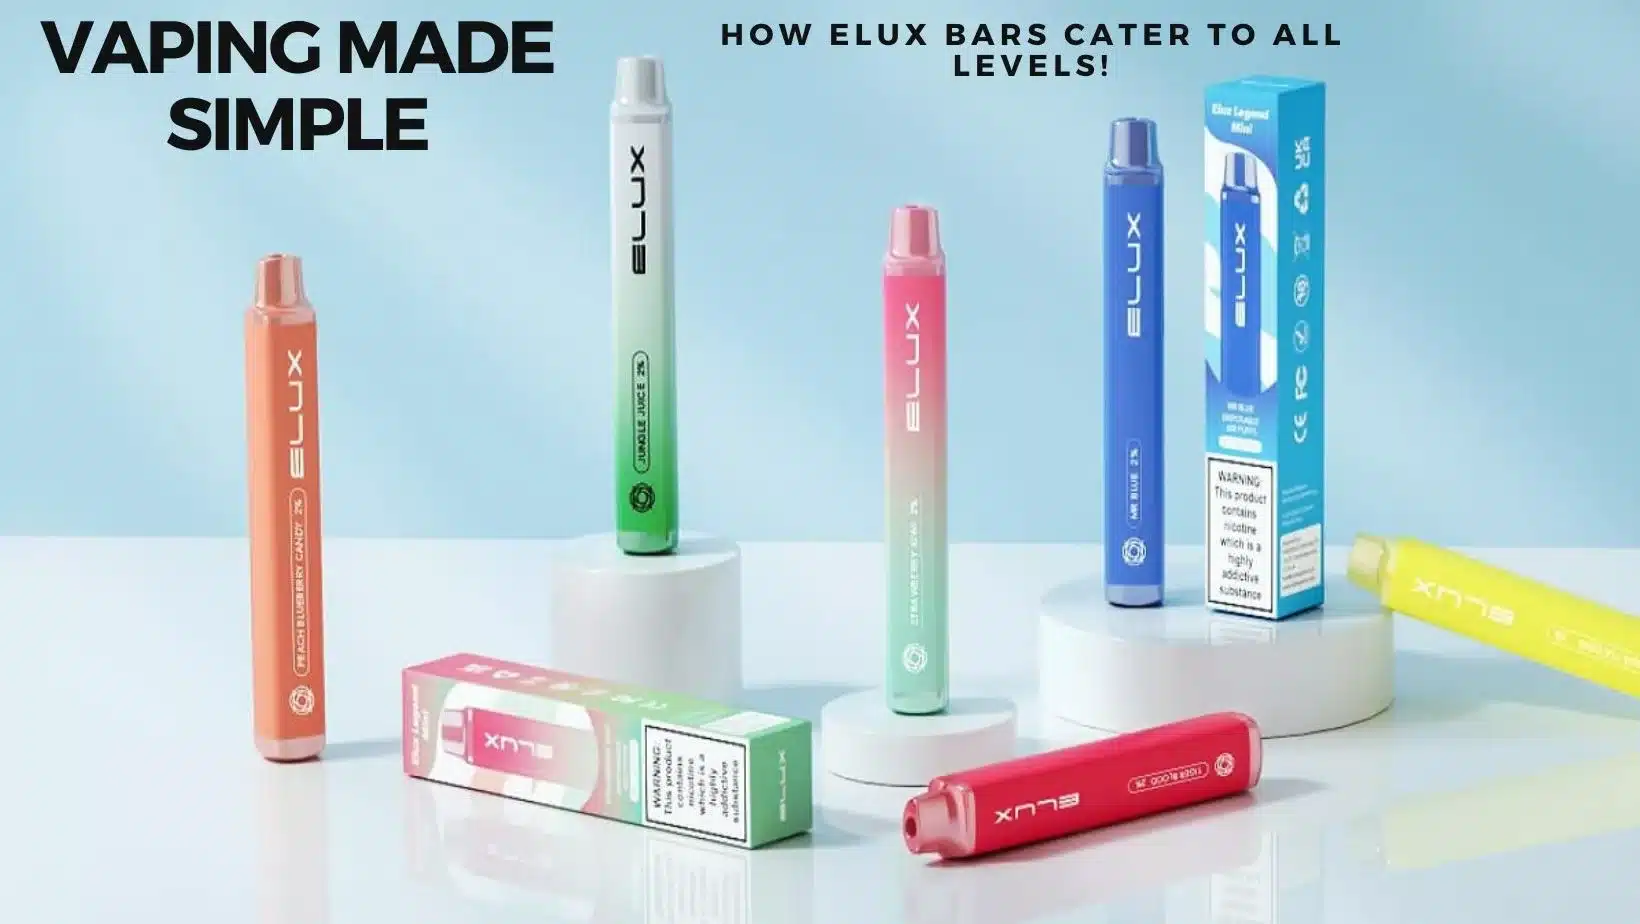 Vaping Made Simple: How Elux Bars Cater to All Levels!